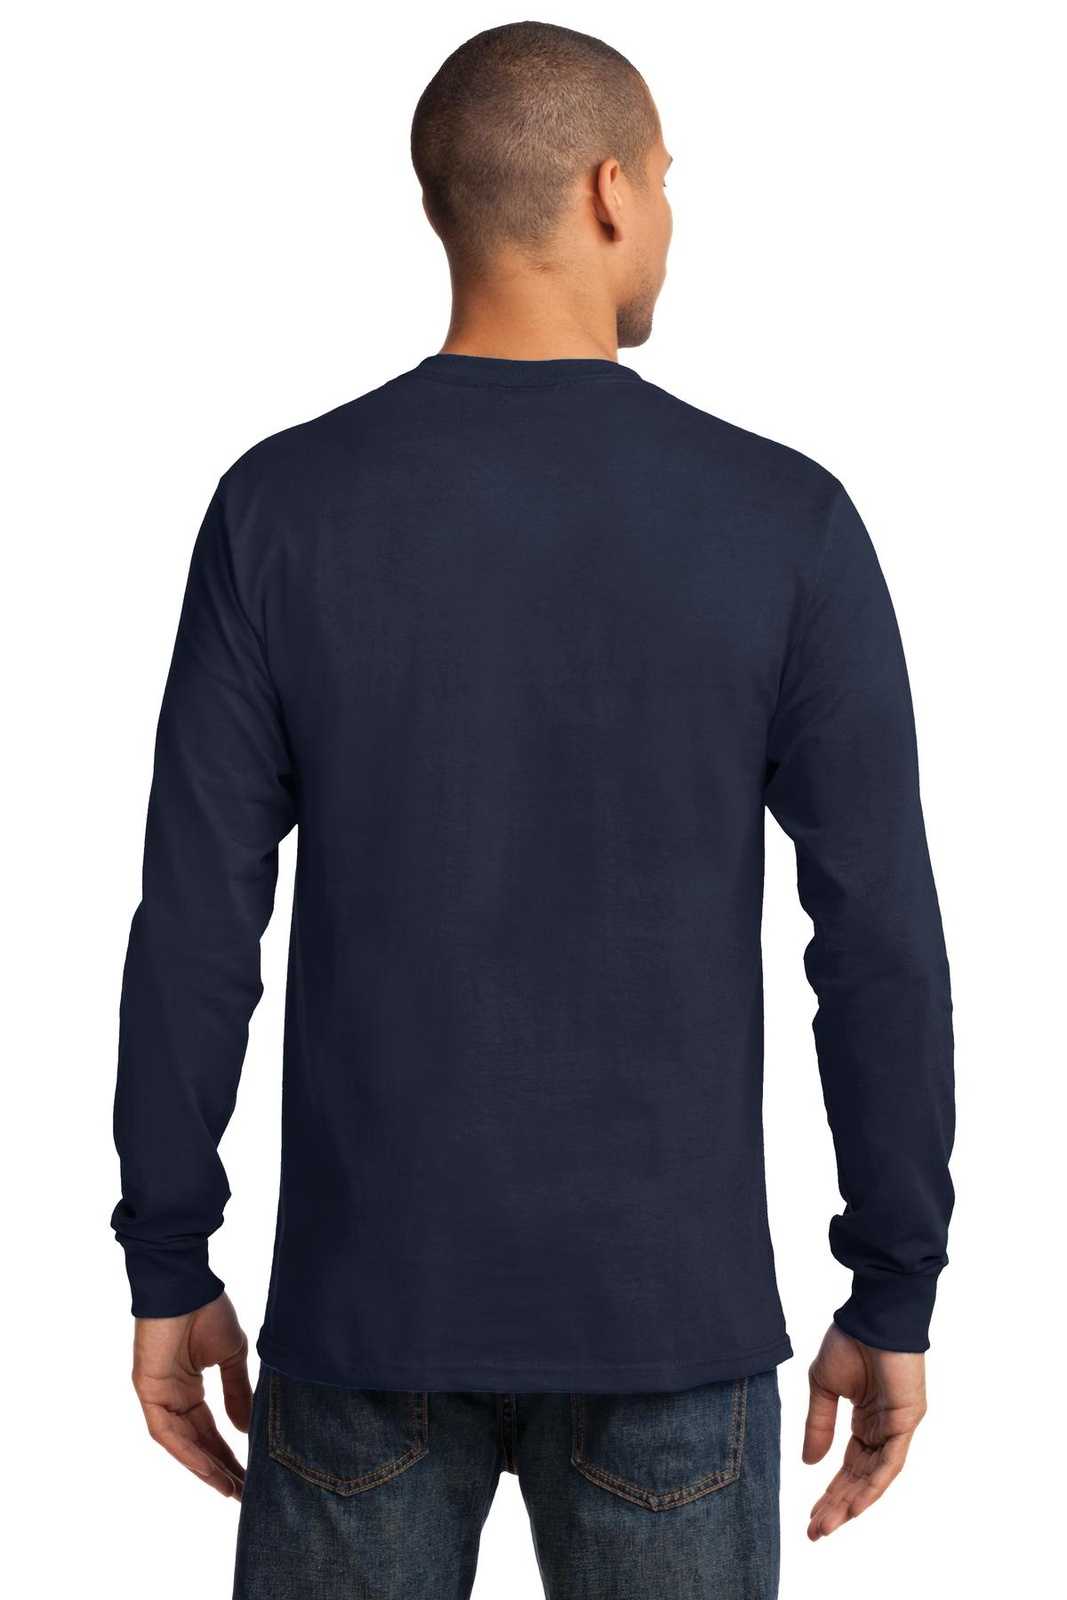 Port & Company PC61LST Tall Long Sleeve Essential Tee - Deep Navy - HIT a Double - 1